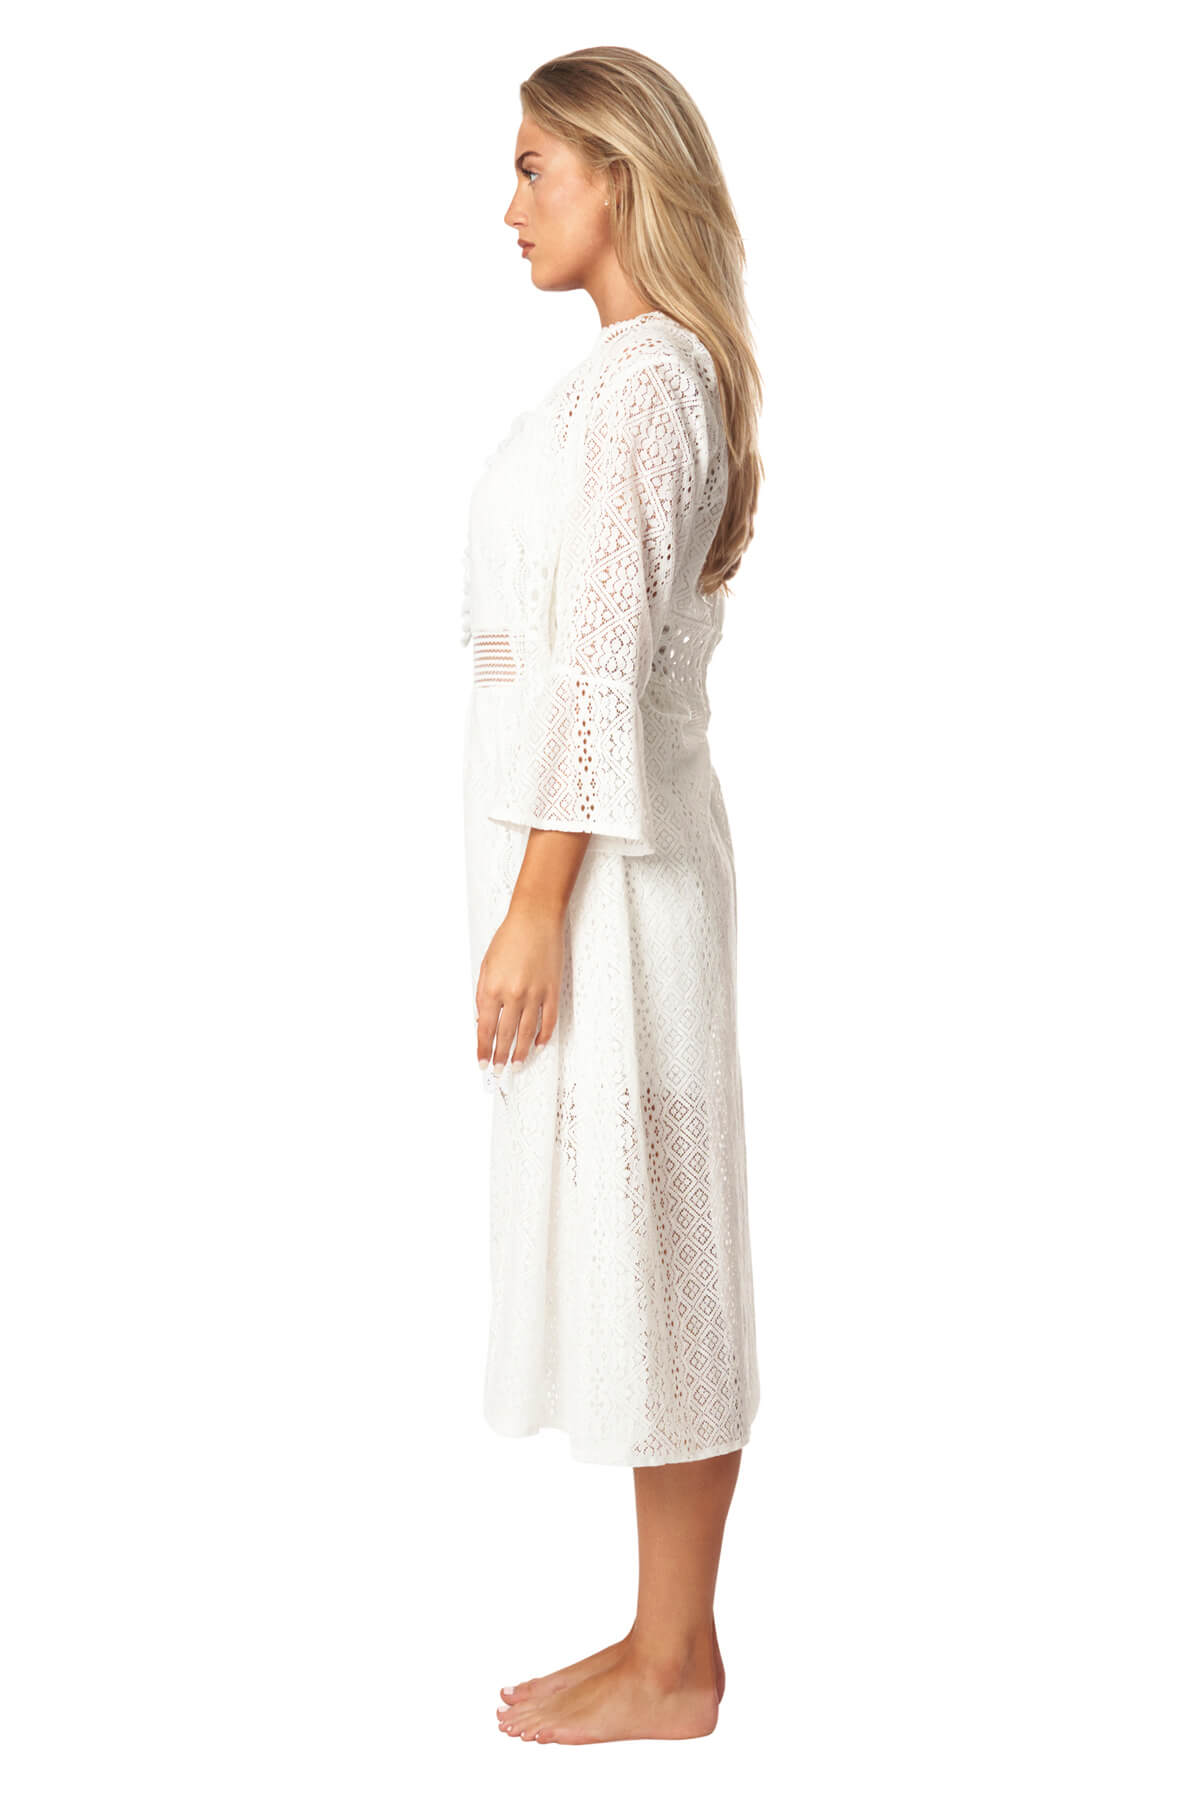 Isadora Two Piece Lace Romper and Duster Cover Up